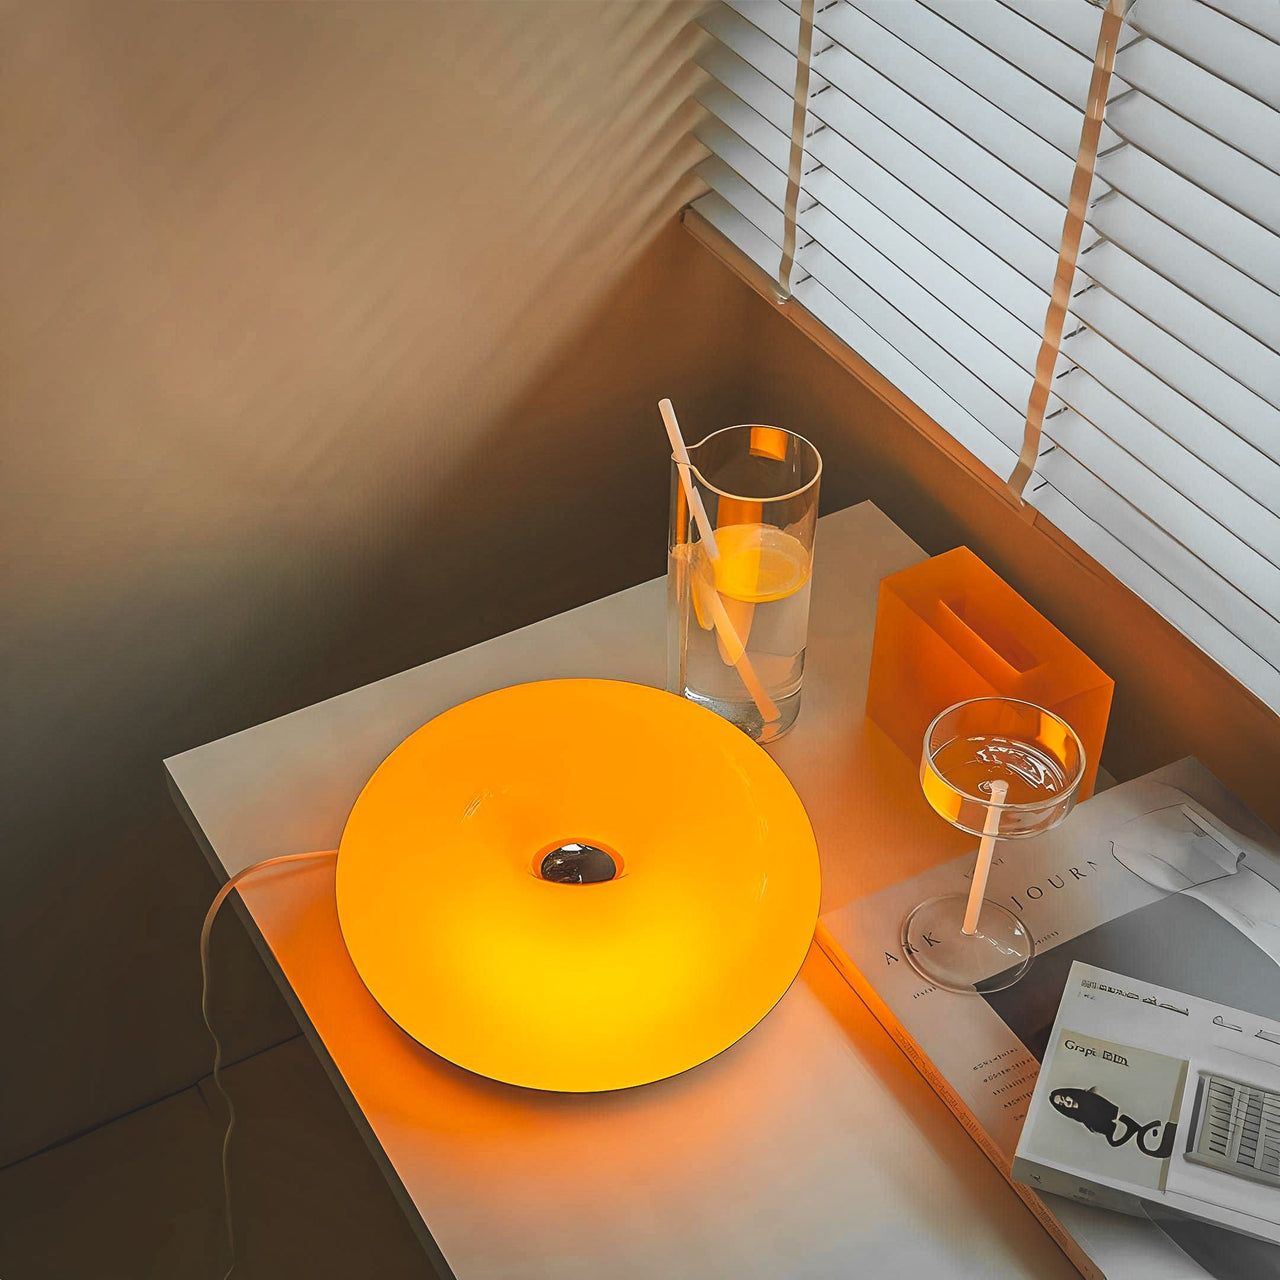 'The Donut' Lamp